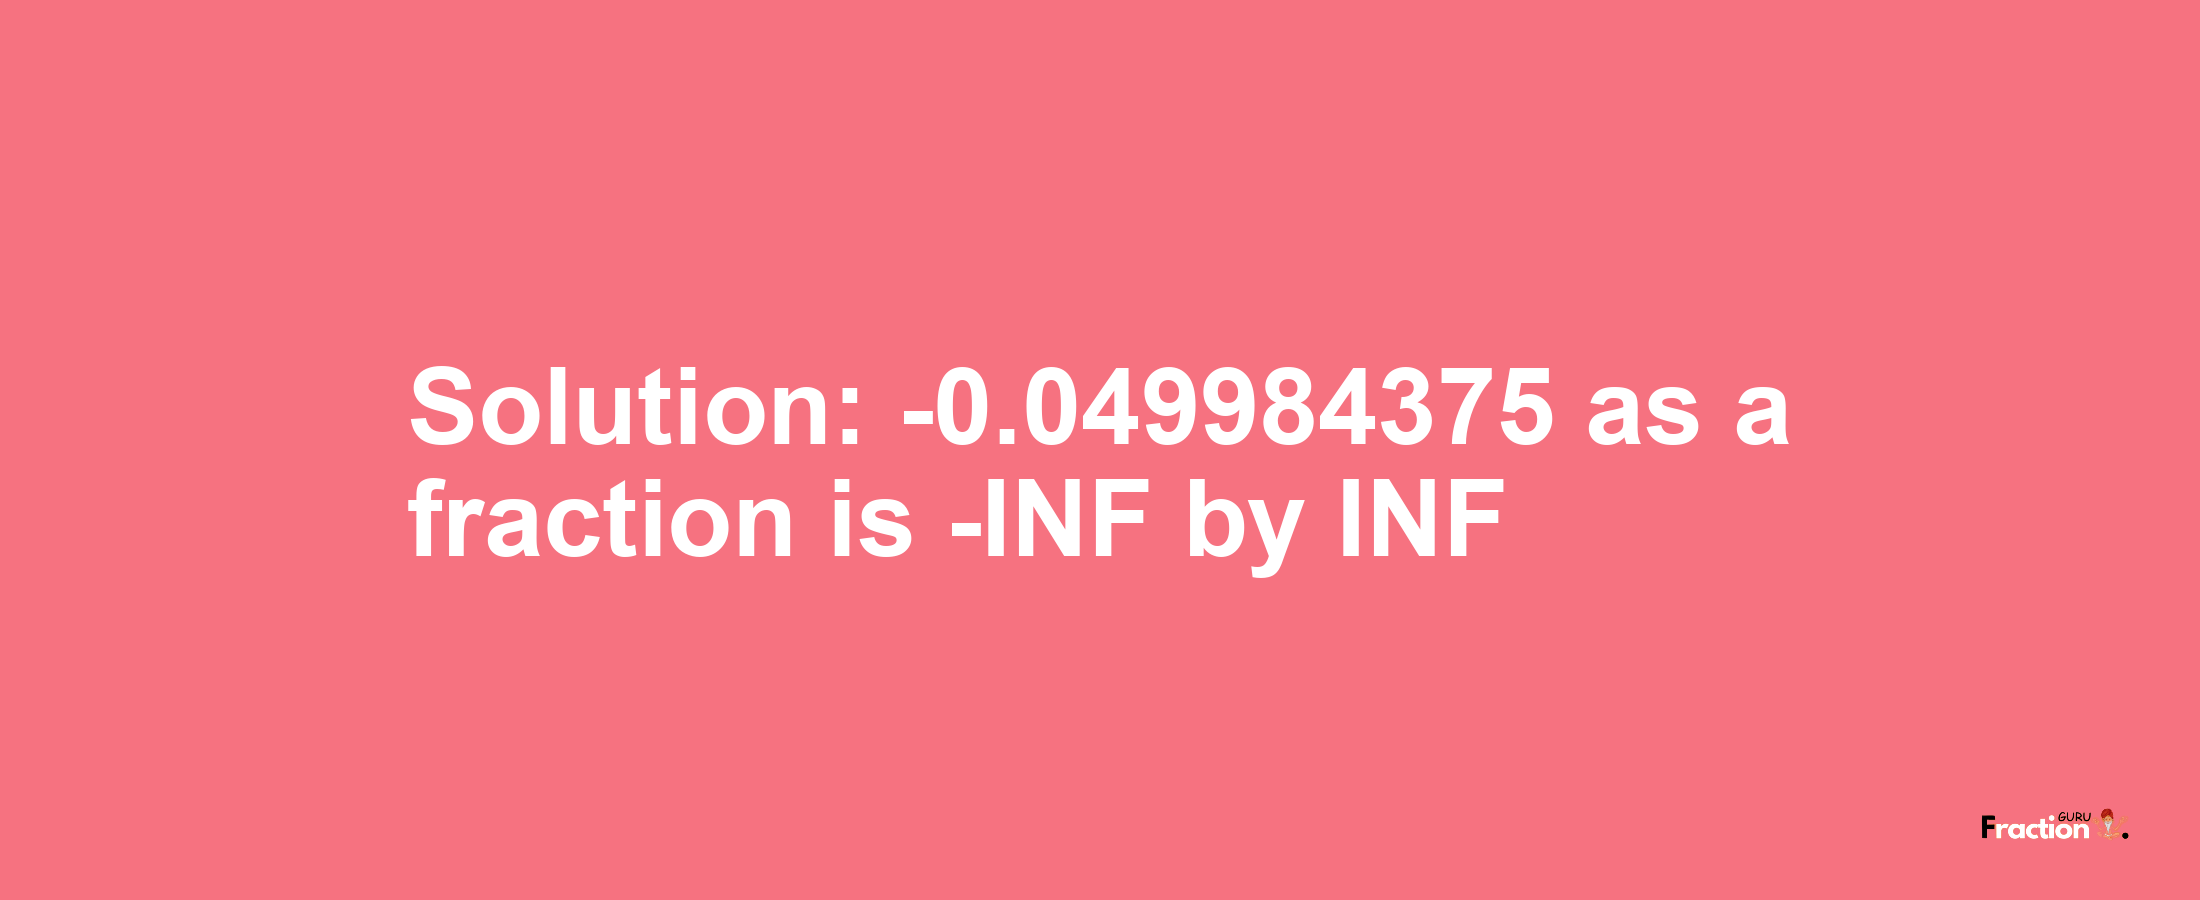 Solution:-0.049984375 as a fraction is -INF/INF